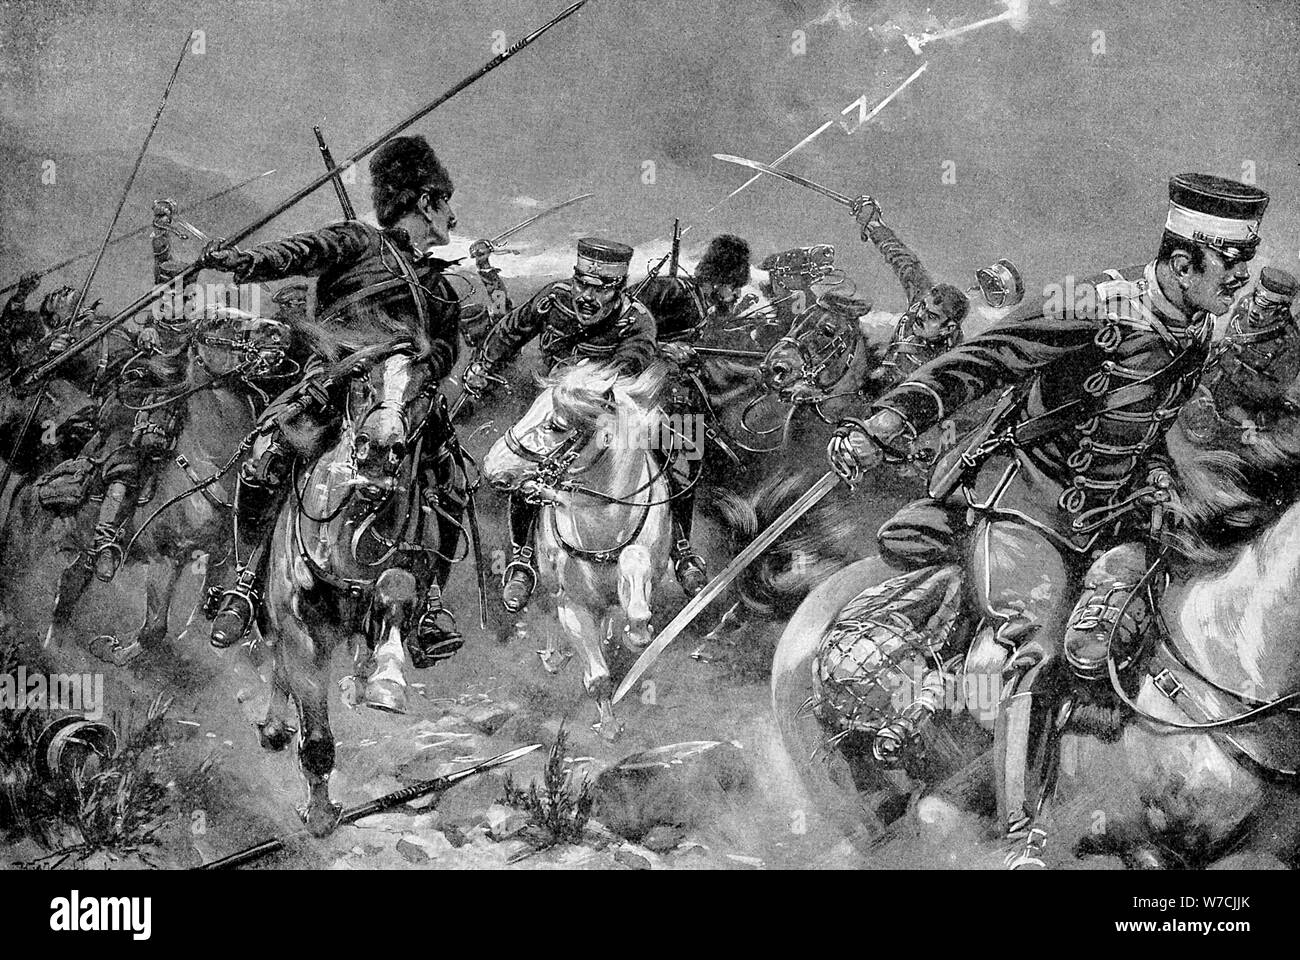 Combat between Cossacks and Japanese Cavalry in a thunderstorm, Russo-Japanese War, 1904-5. Artist: Unknown Stock Photo